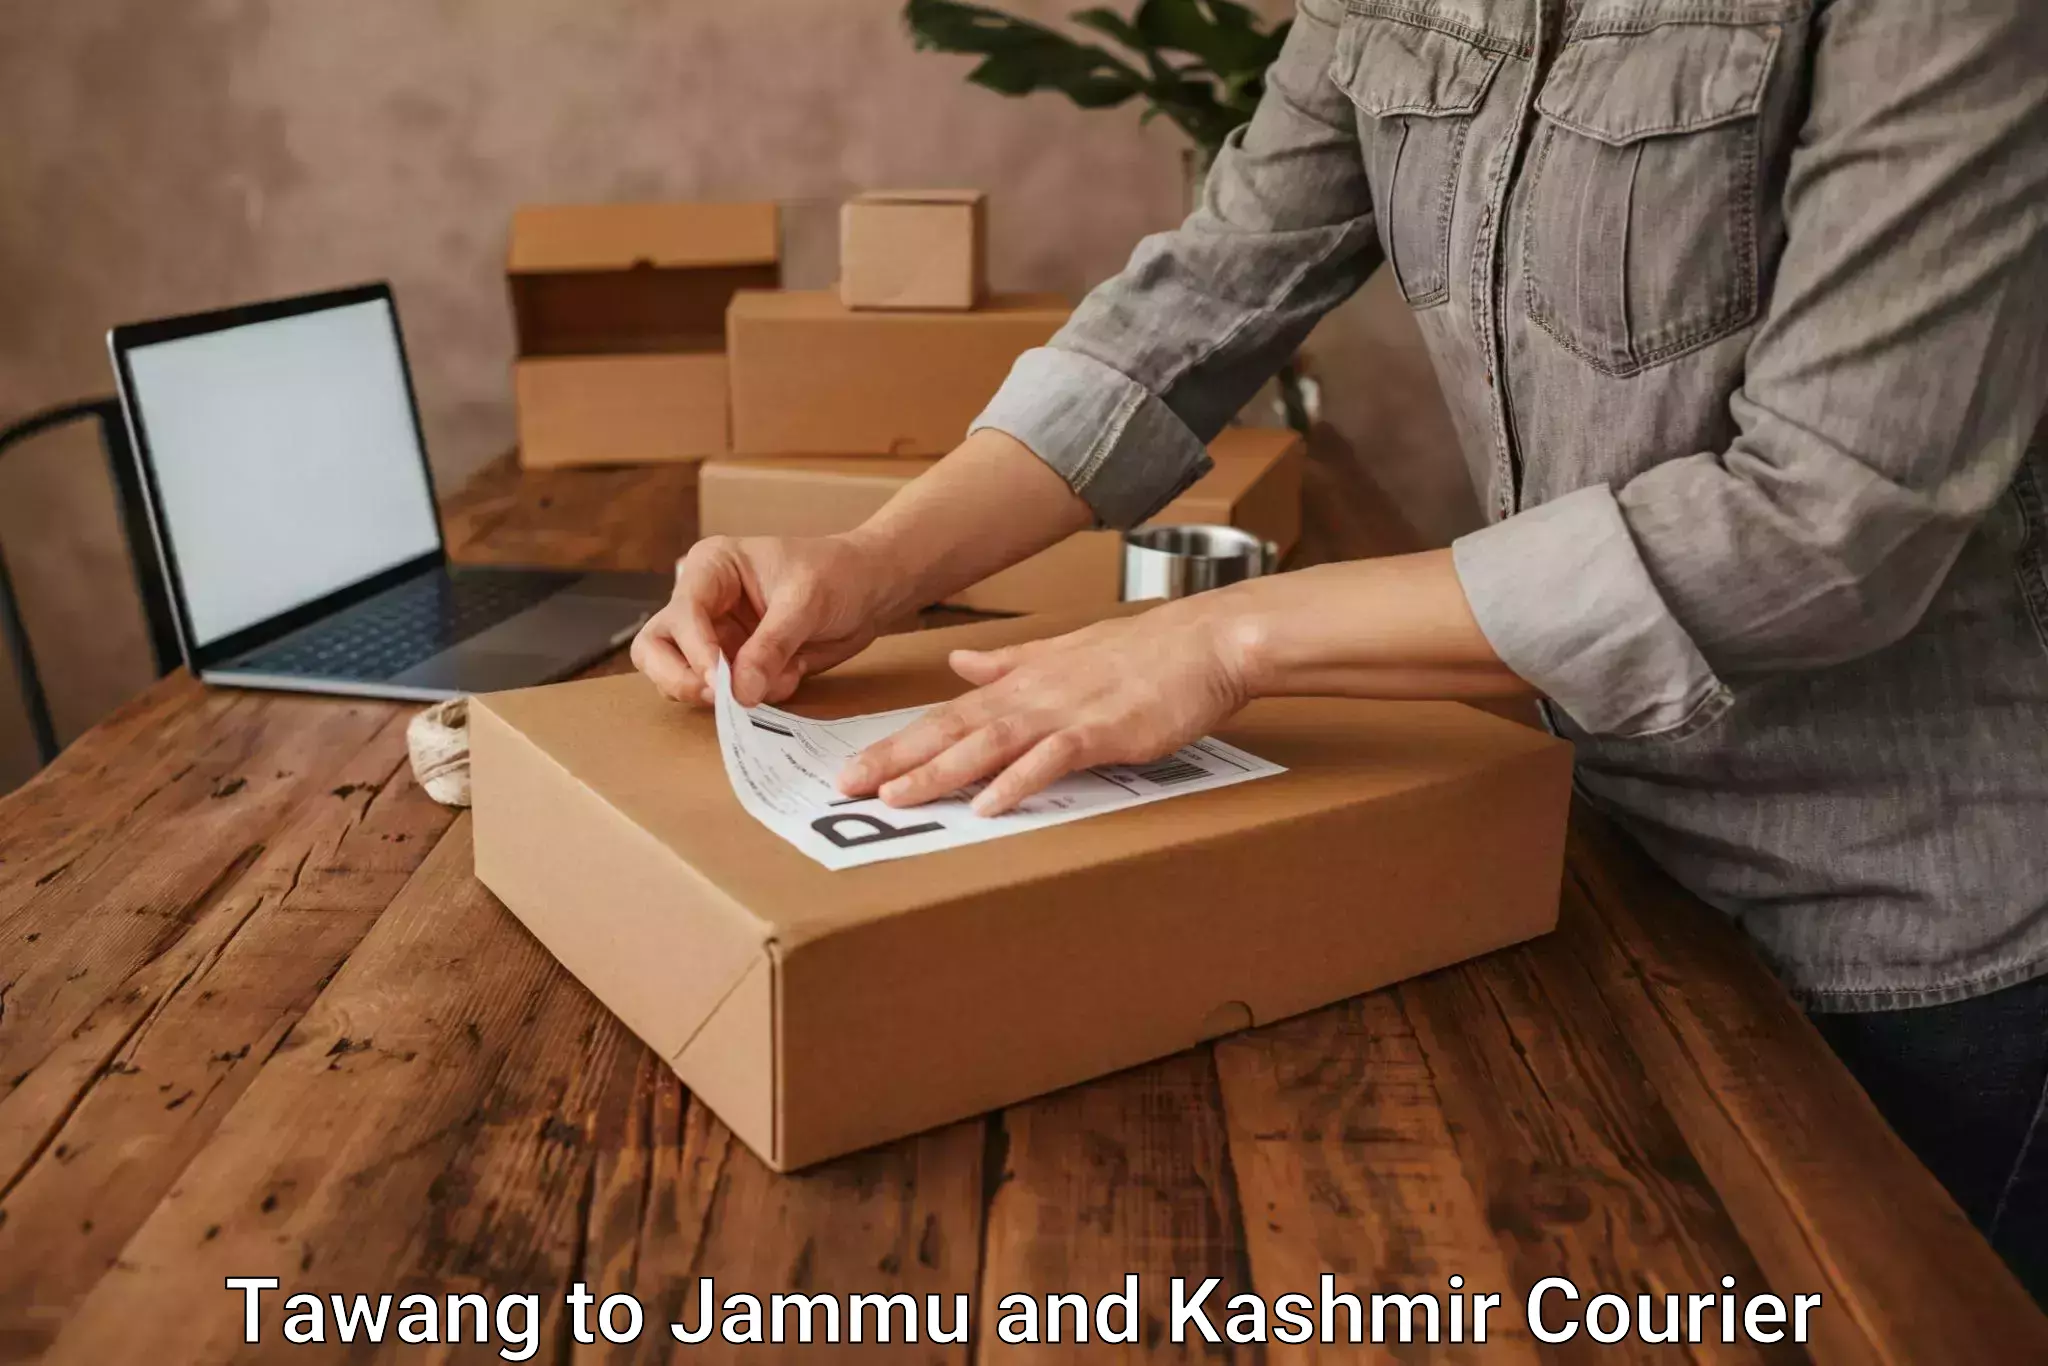 Remote area delivery in Tawang to Jammu and Kashmir